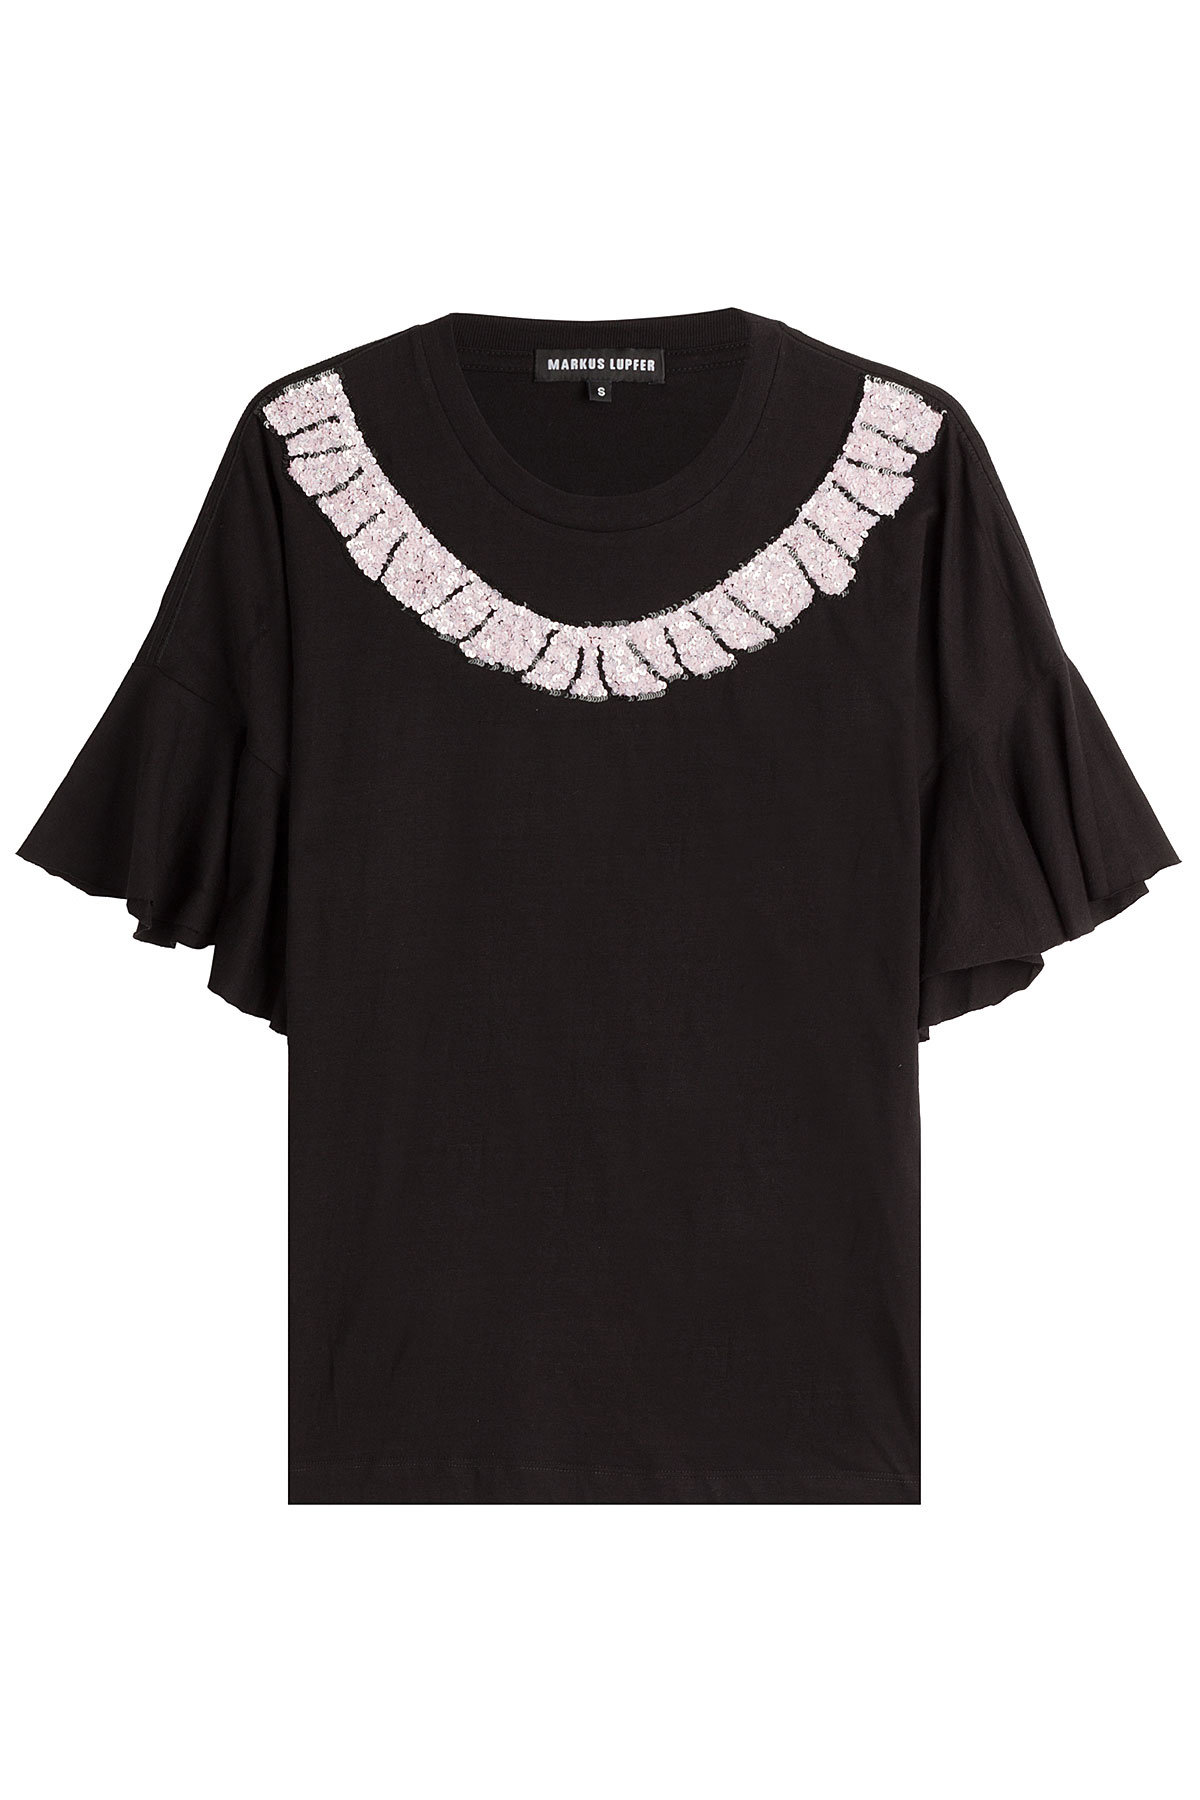 Markus Lupfer - Cotton T-Shirt with Sequins